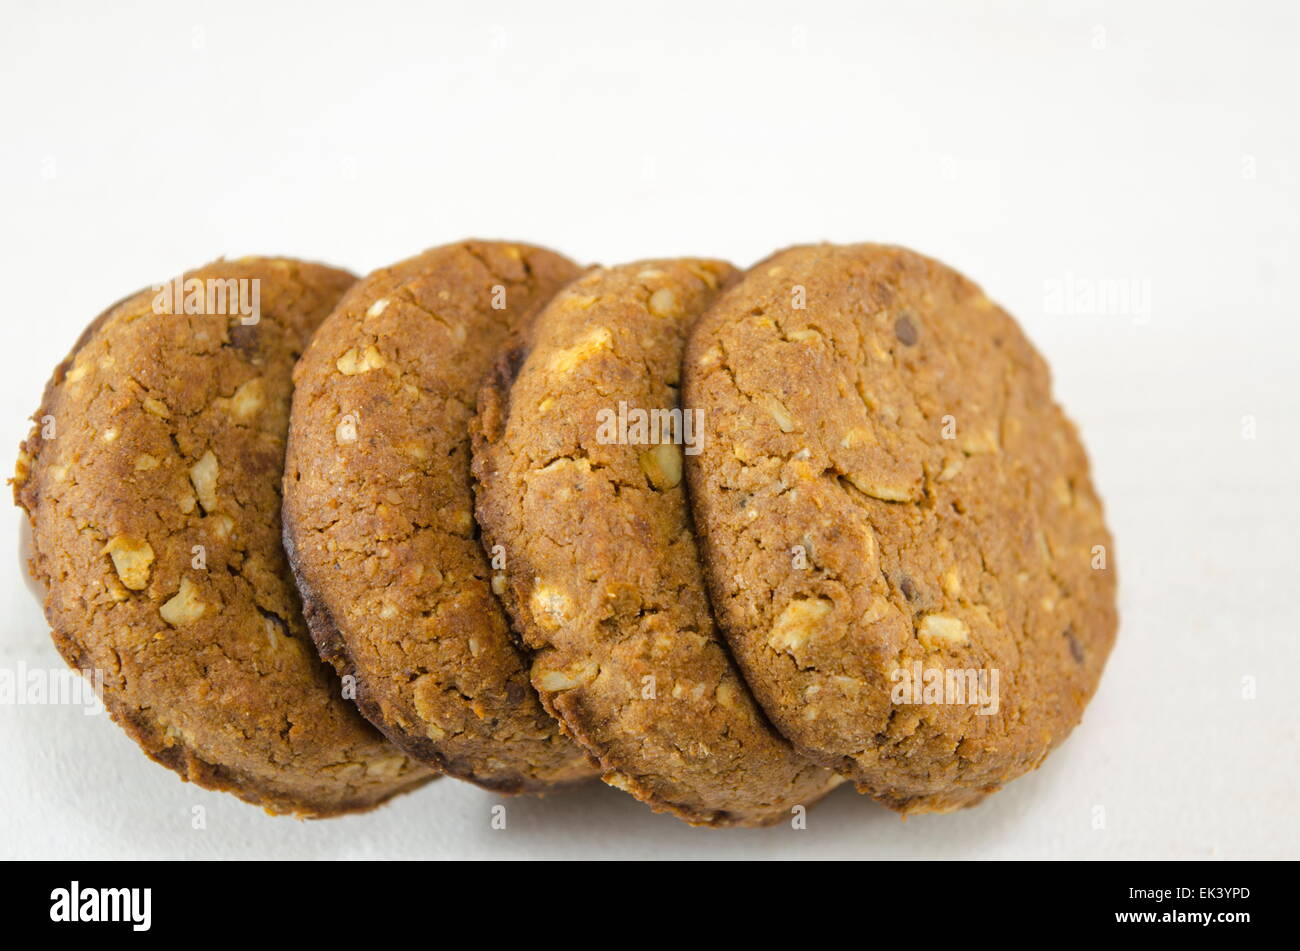 Integral biscuits on white background Stock Photo